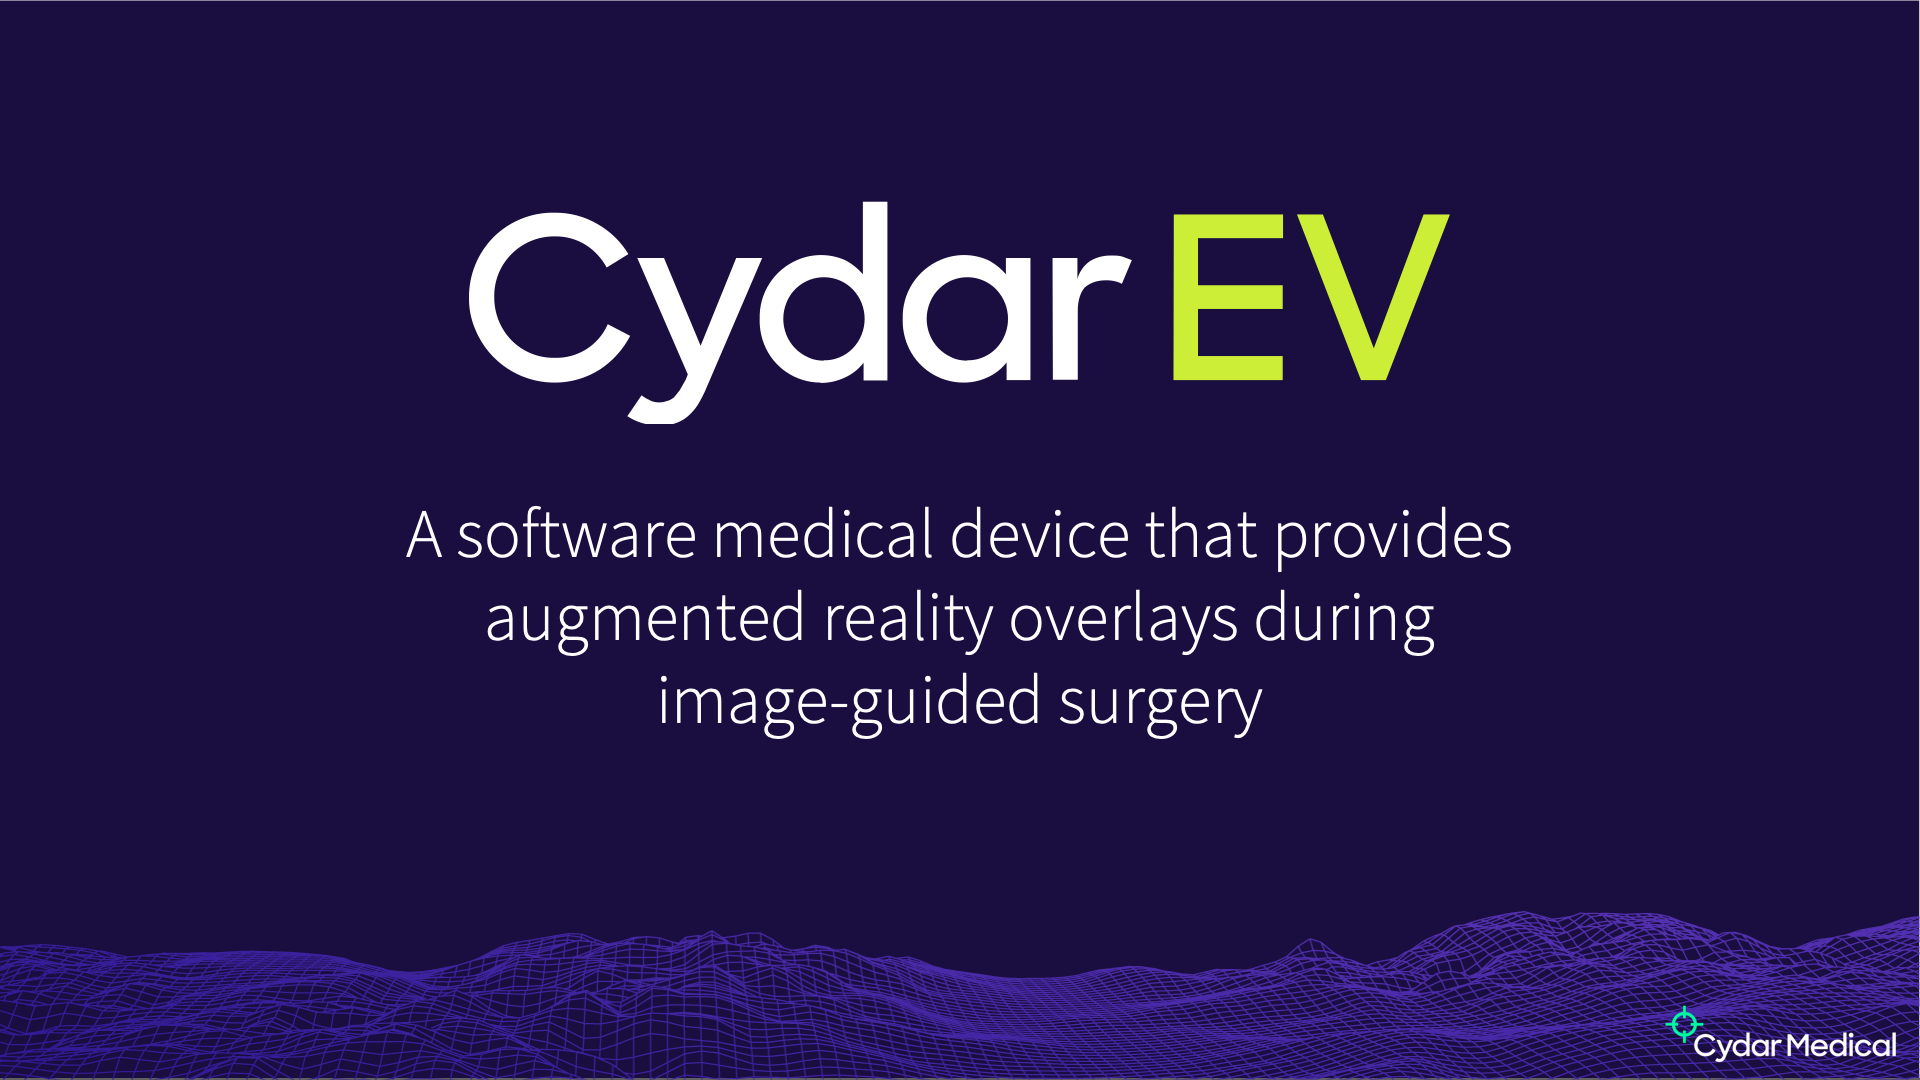 Cydar EV: A software medical device that provides augmented reality overlays during image guided surgery